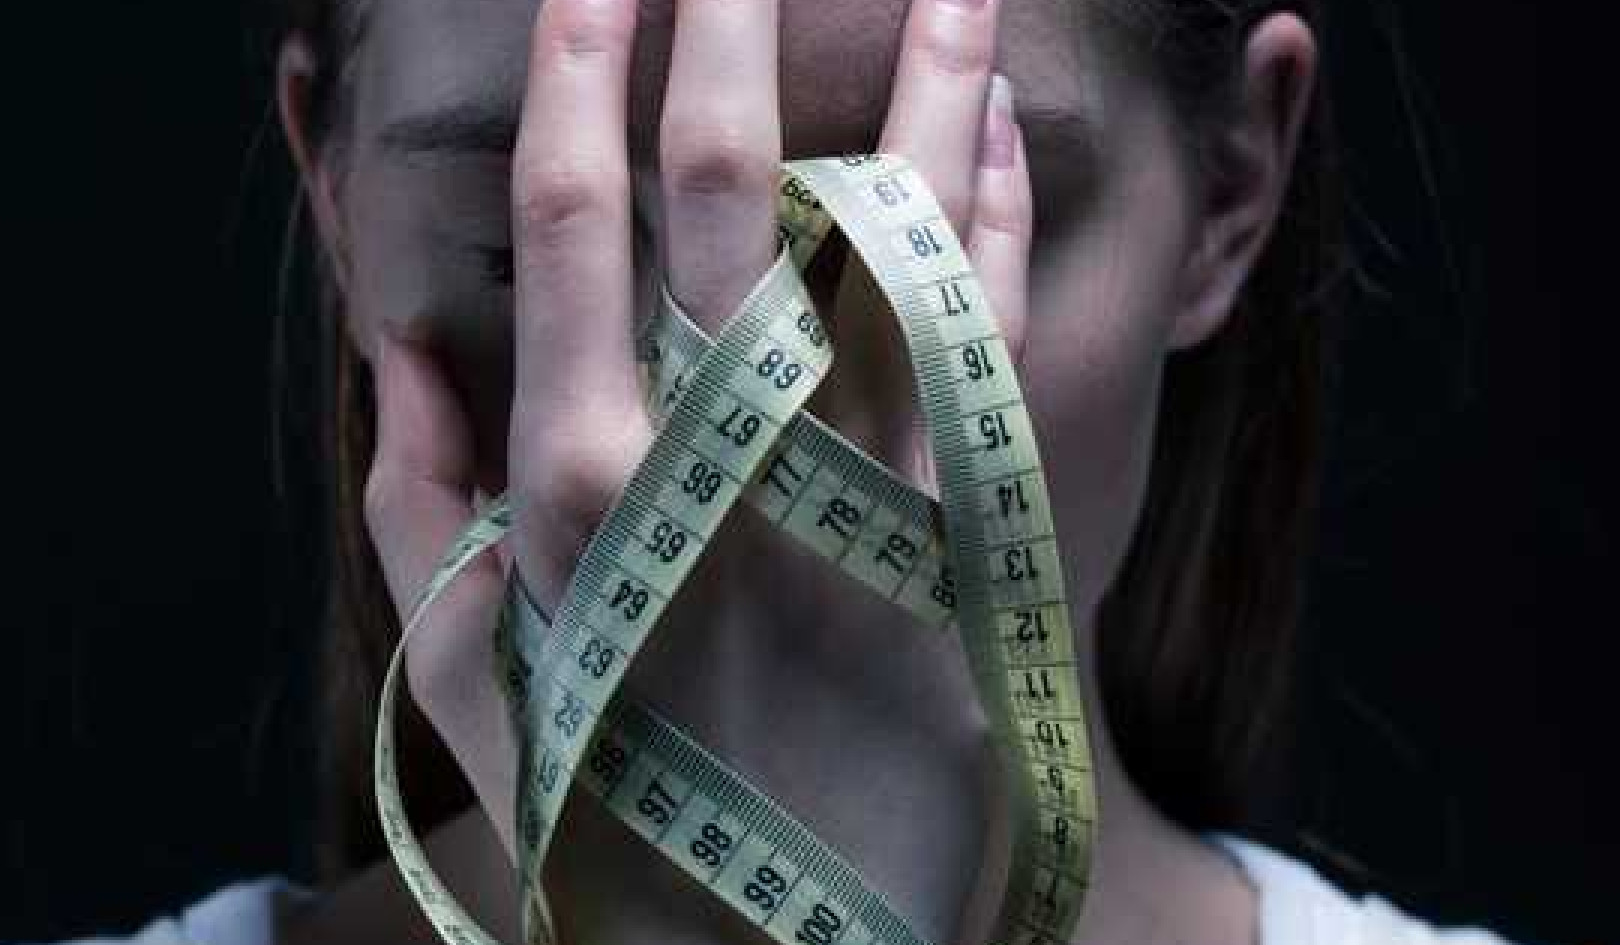 The Early Warning Signs of Eating Disorders